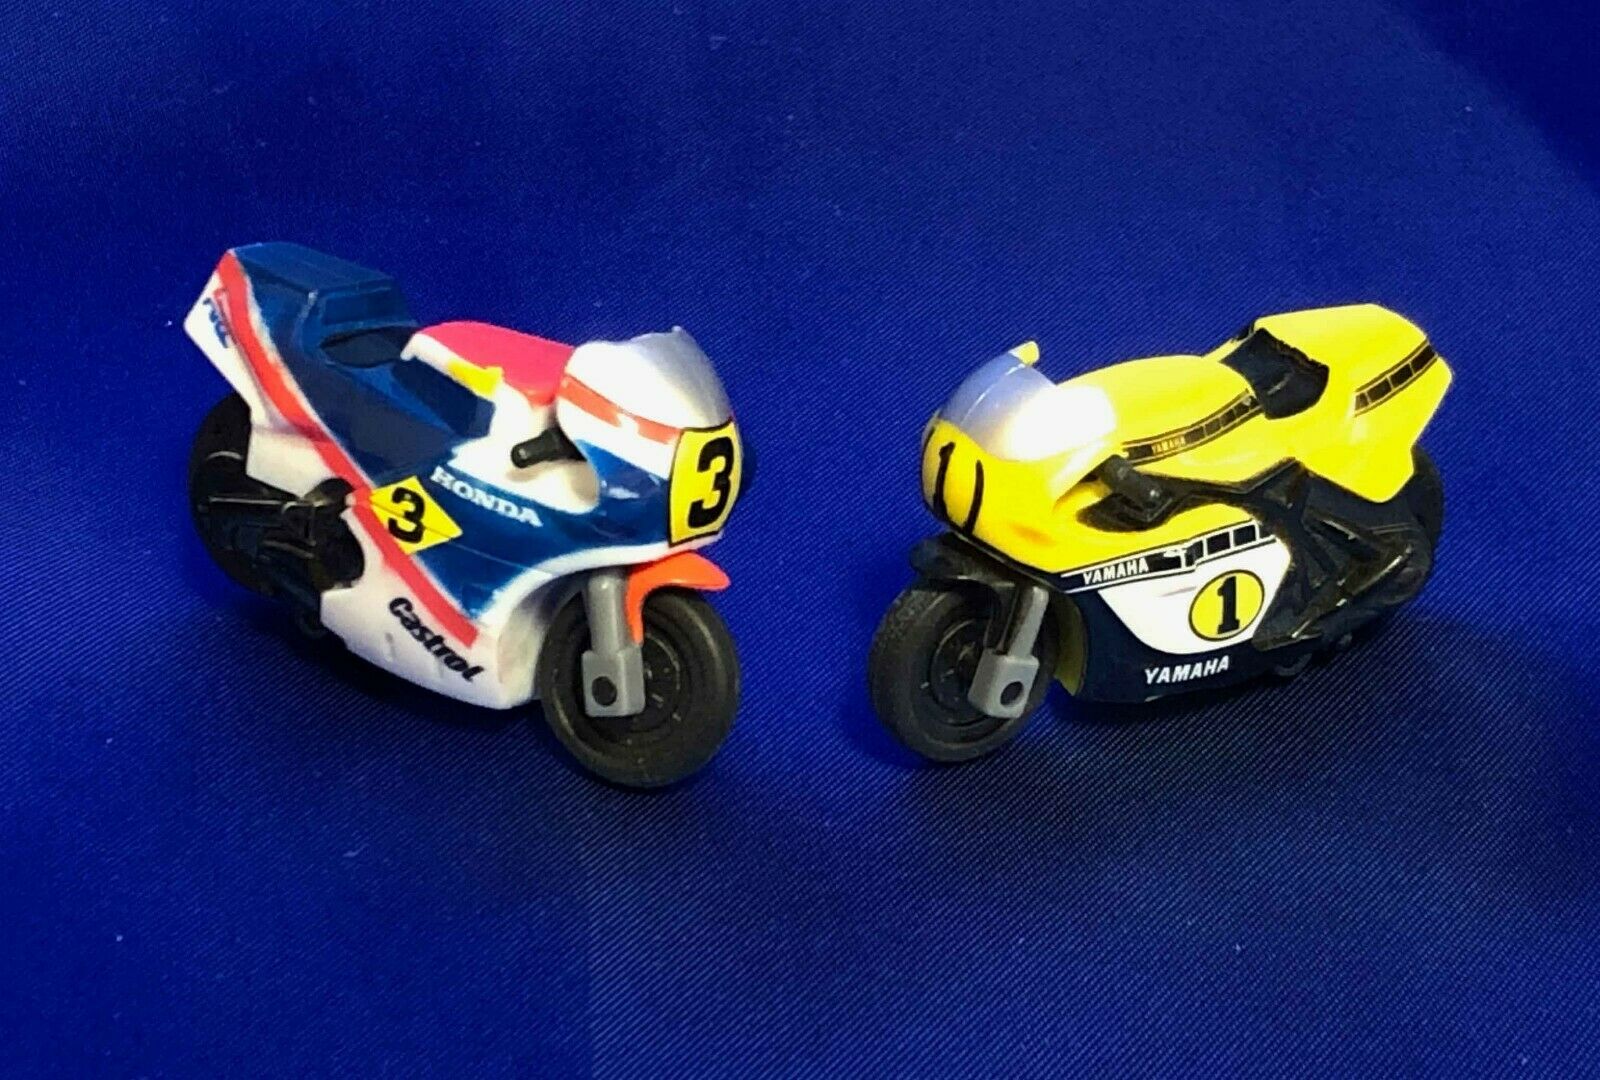 Kenny Roberts & Freddie Spencer 80's Motor Cycle Toy Run! With Tracking Number